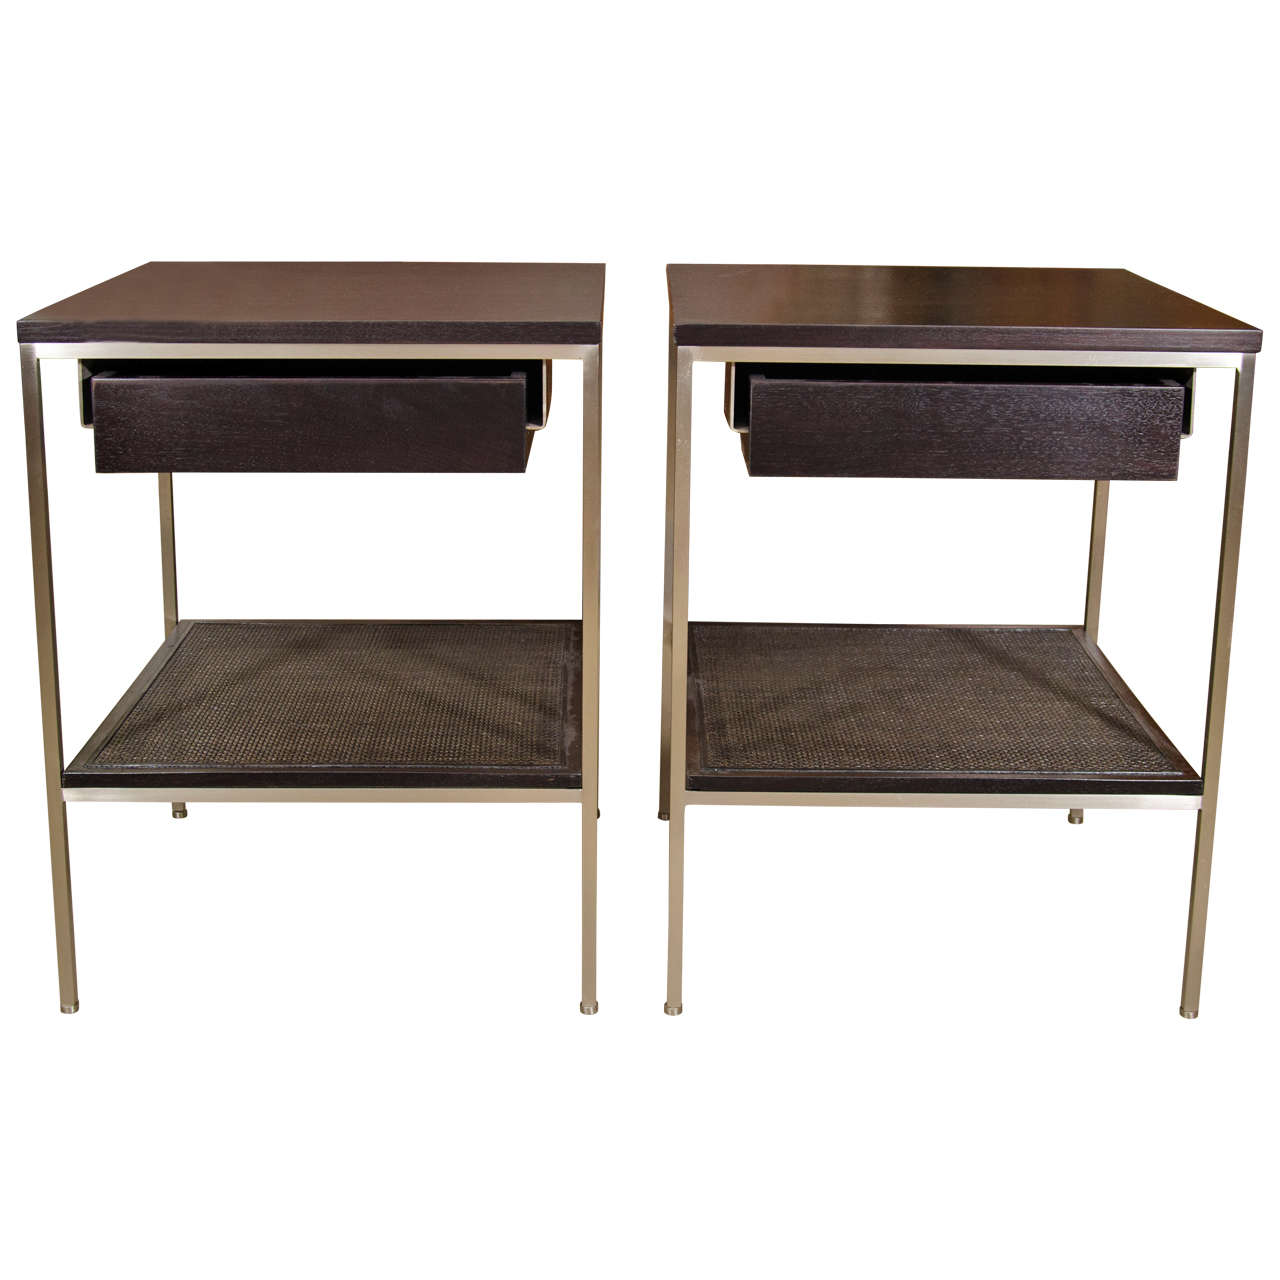 Signature Ebonized Bedside Tables with Satin Nickel Frames and Caned Shelves For Sale